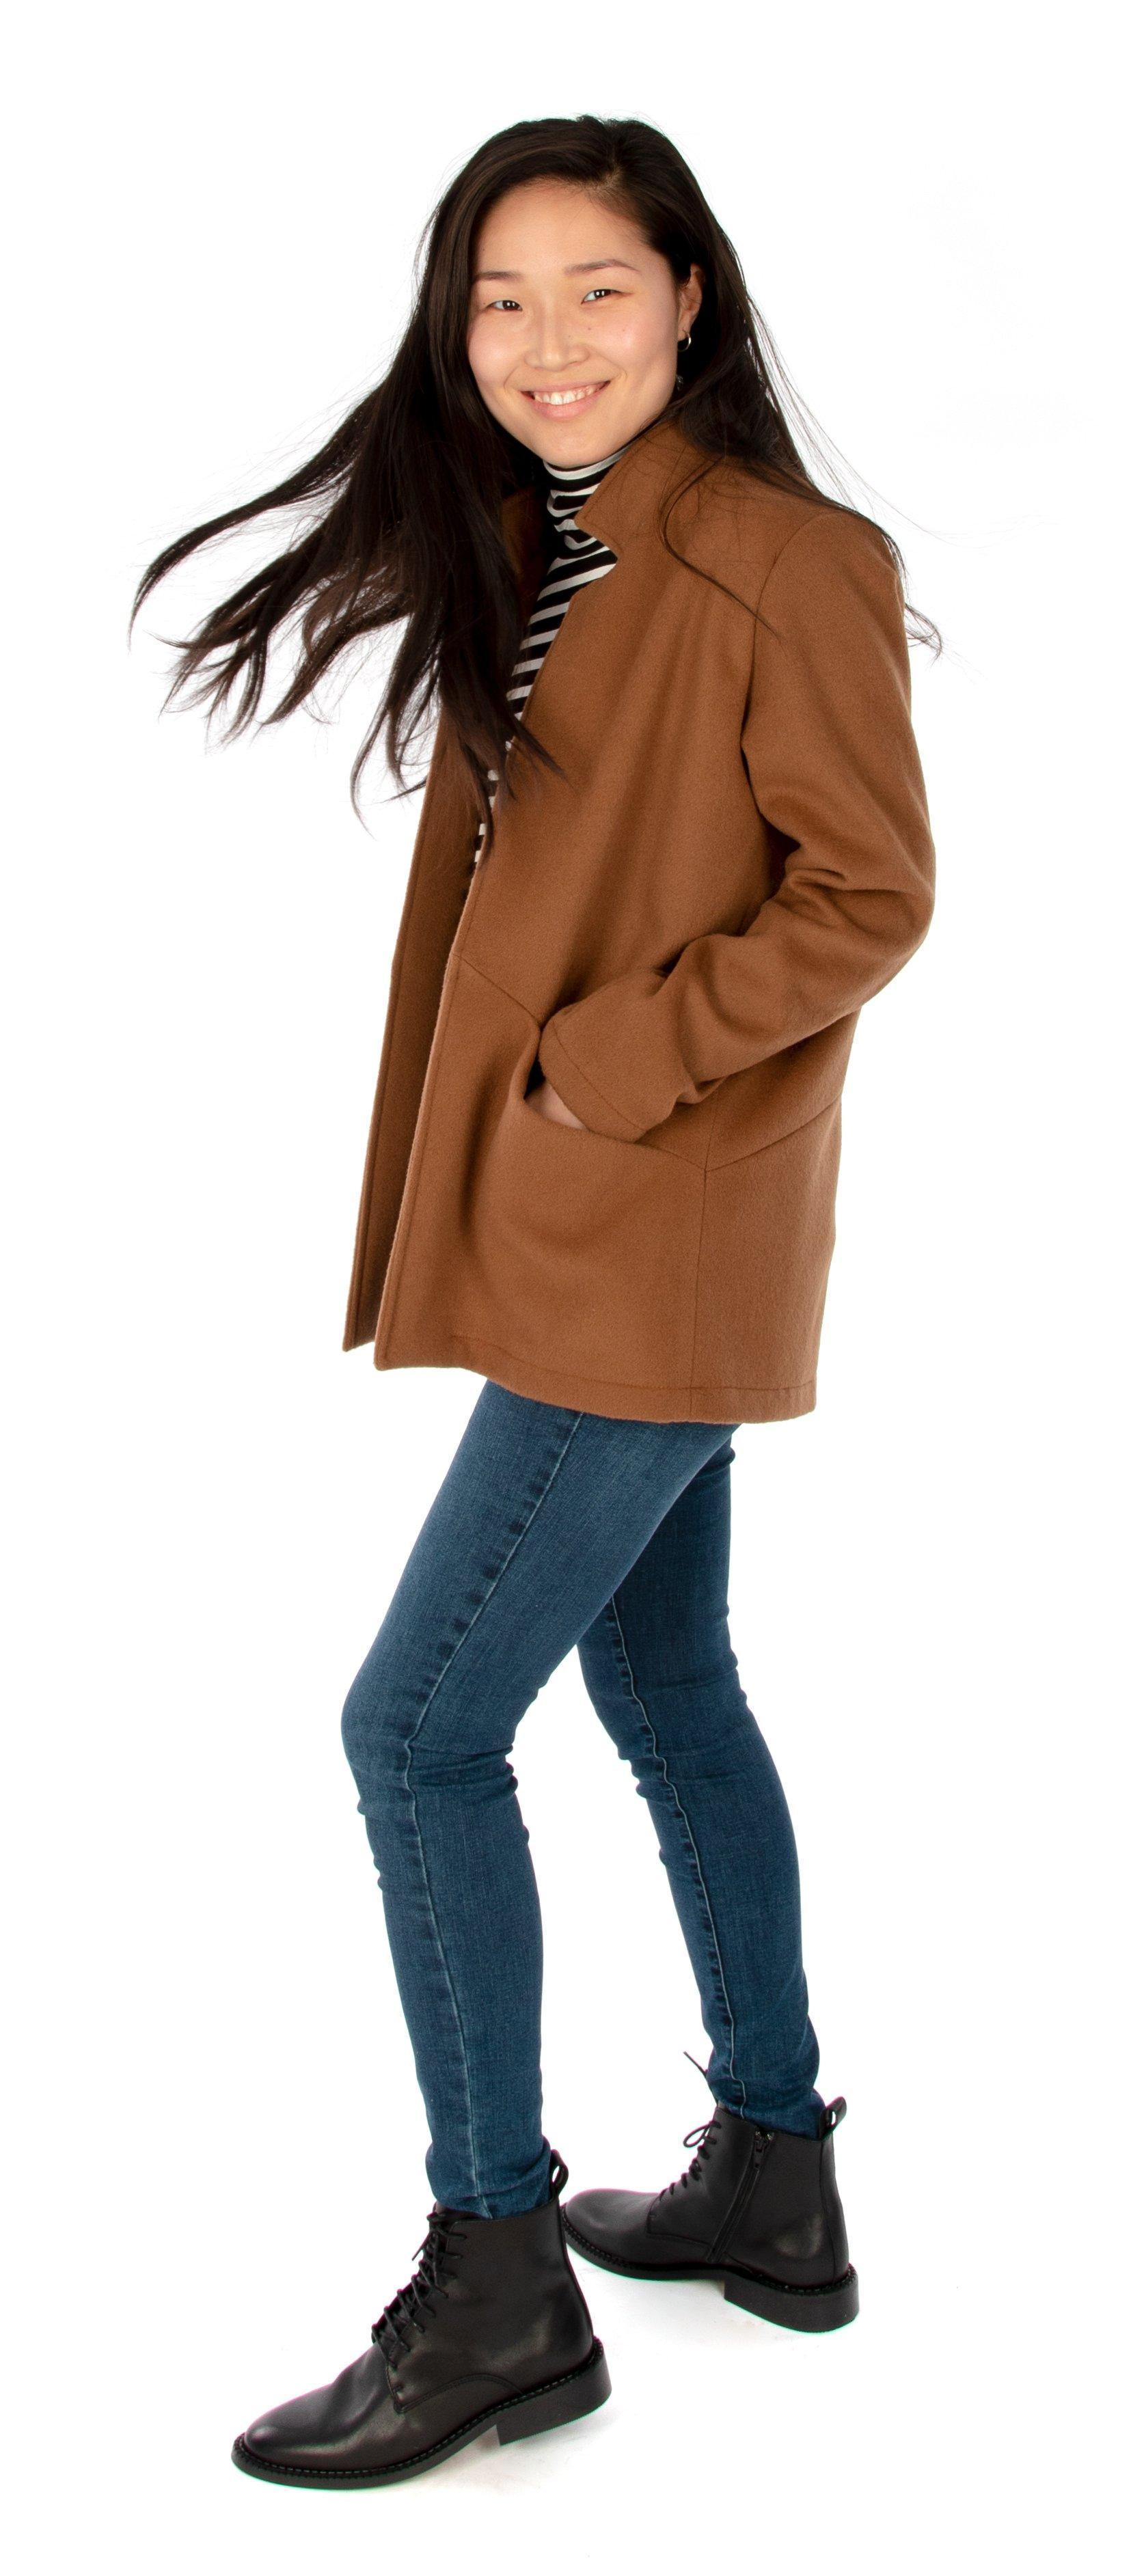 Jalie 3906 Coatigan - 2 sizes more than her regular size for a relaxed / loose fit.